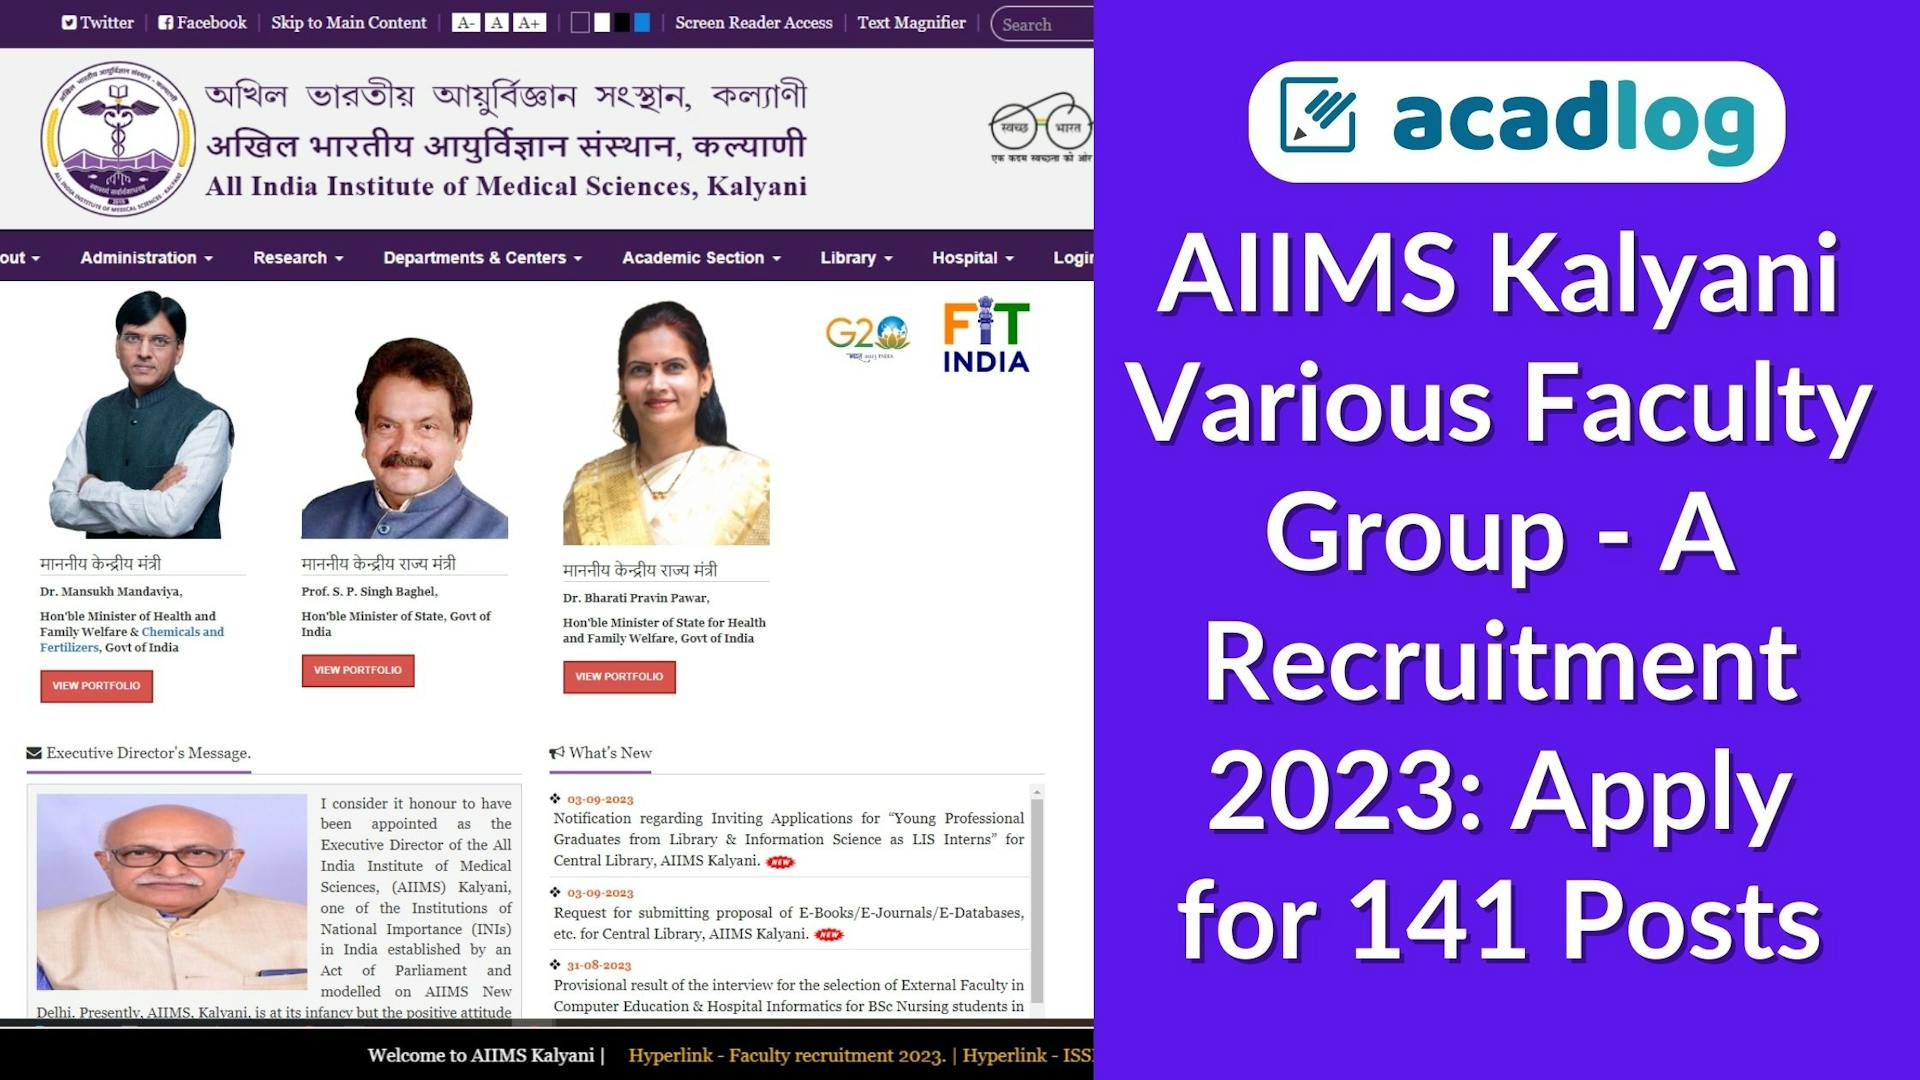 AIIMS Kalyani Various Faculty Group - A Recruitment 2023: Apply for 141 Posts